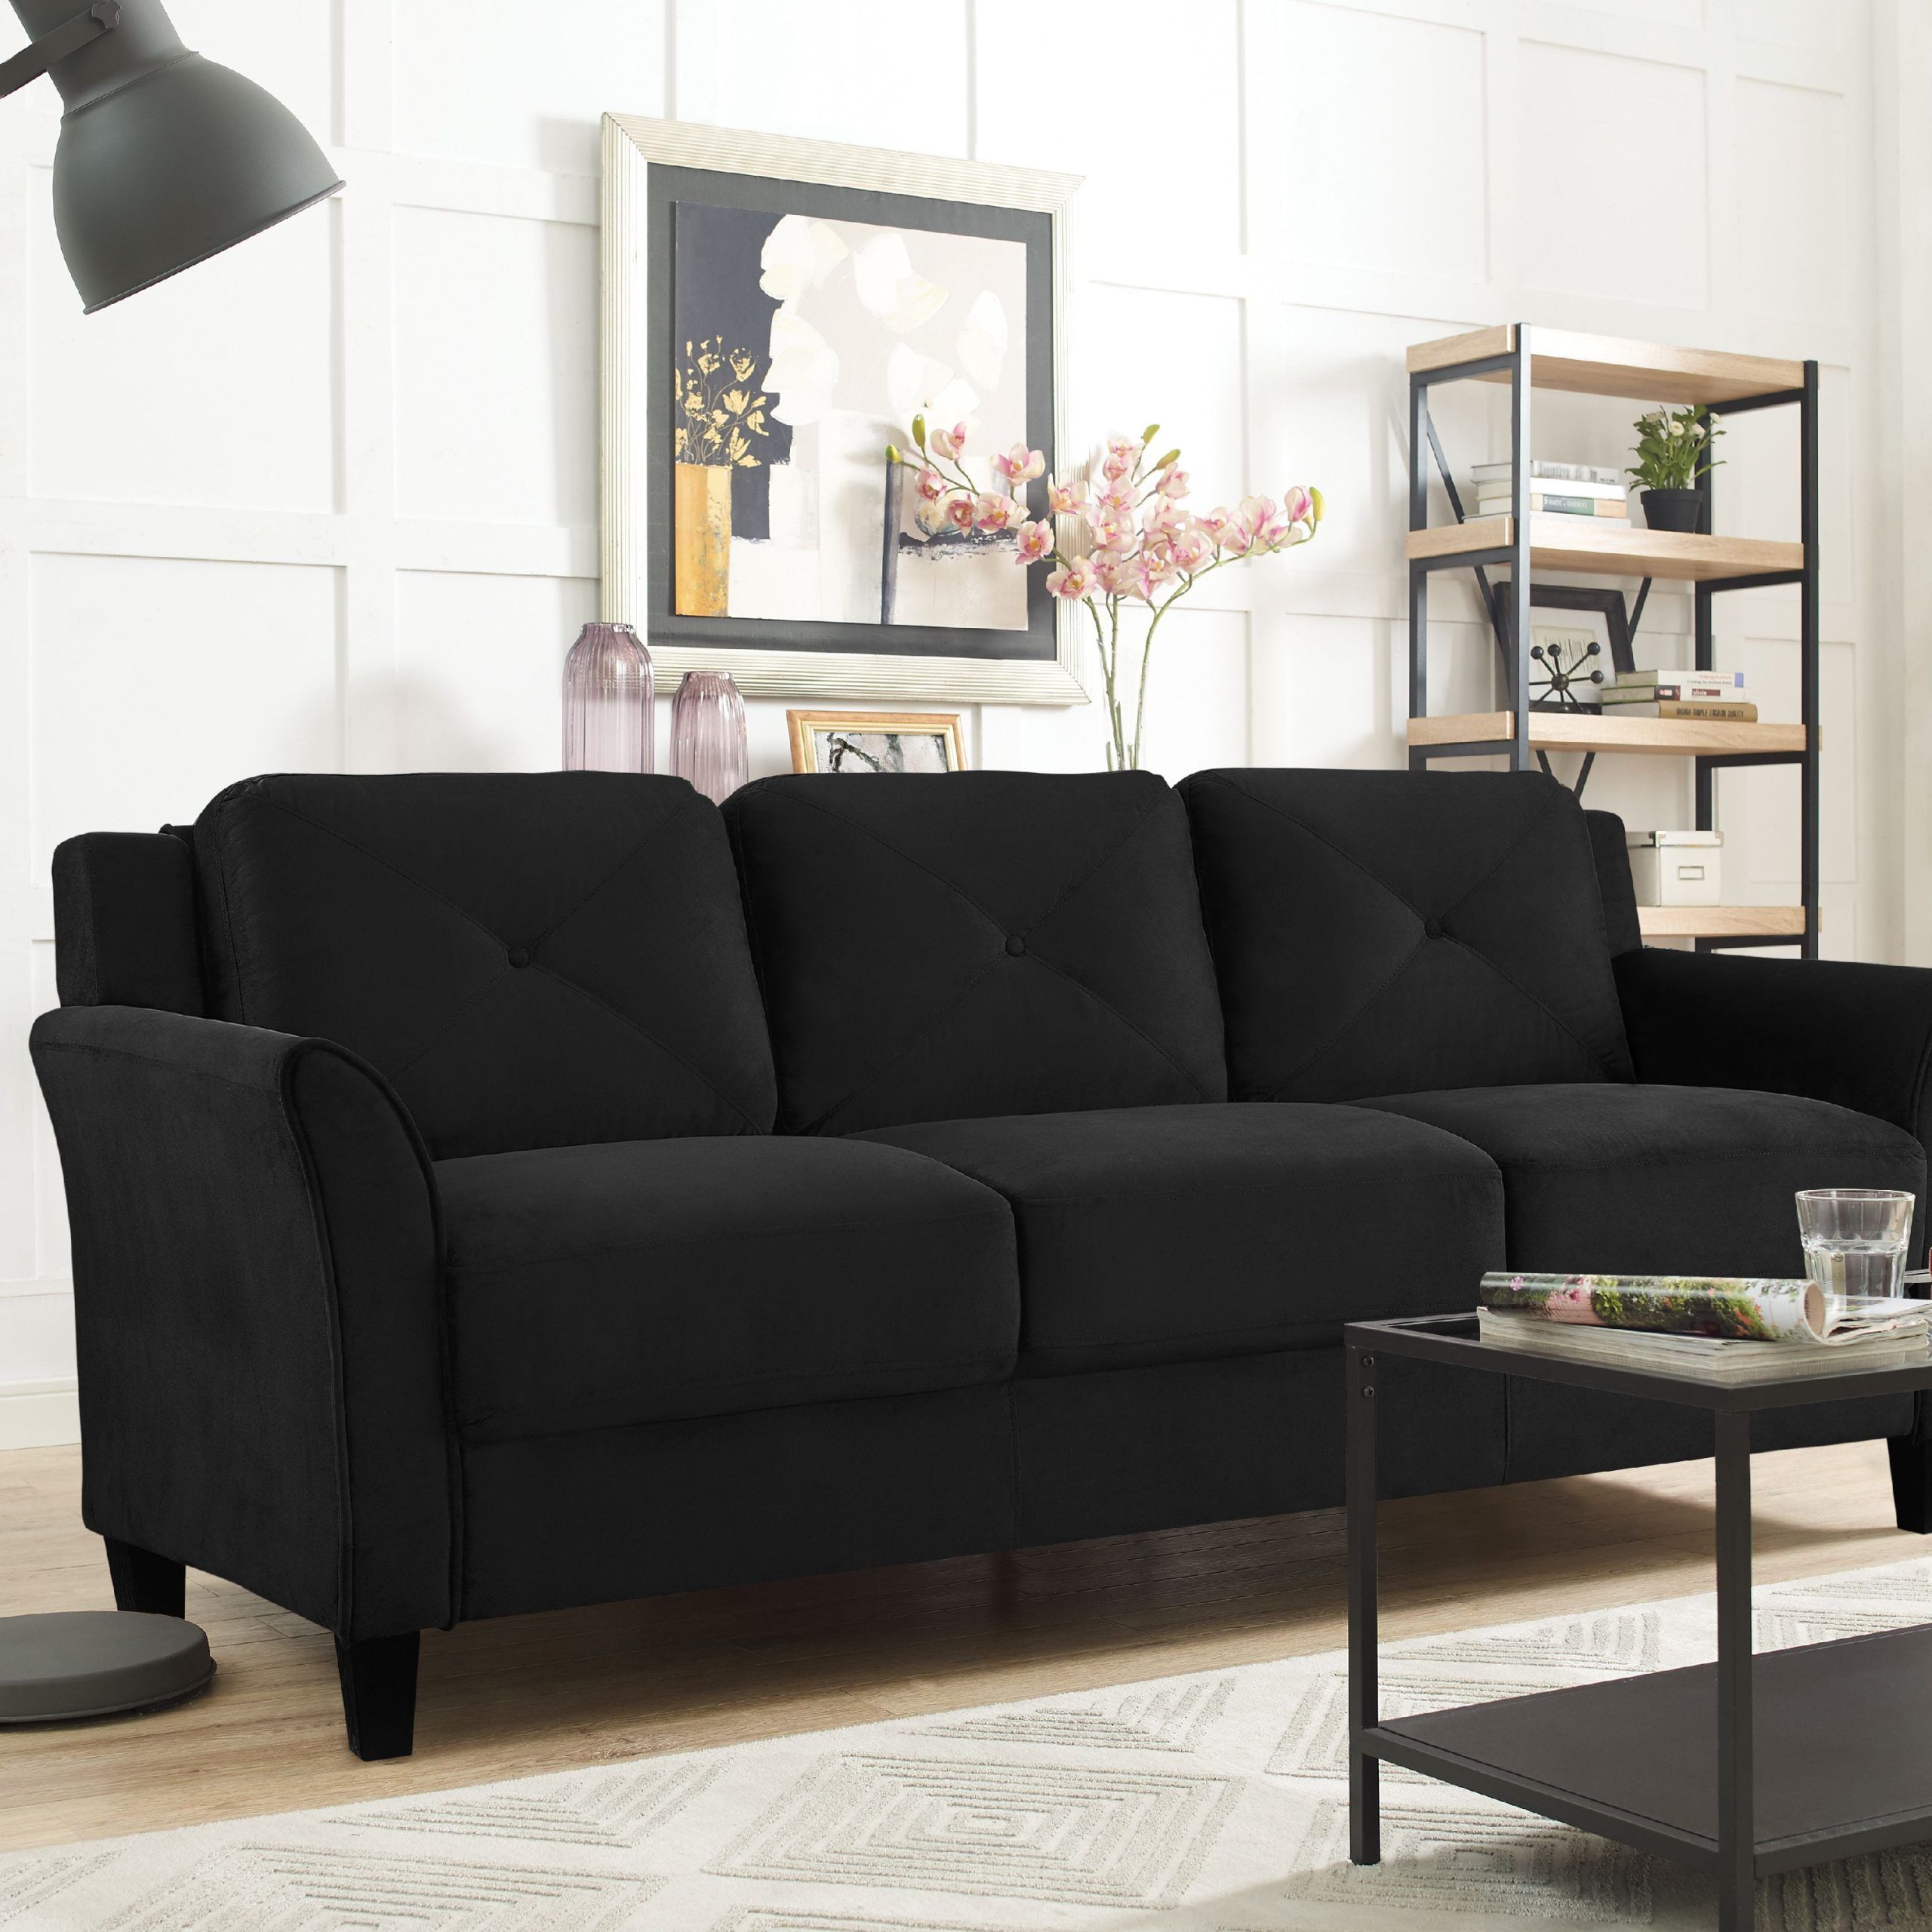 Lifestyle Solutions Taryn Curved Arm Fabric Sofa, Black – Walmart For Traditional Black Fabric Sofas (Gallery 11 of 21)